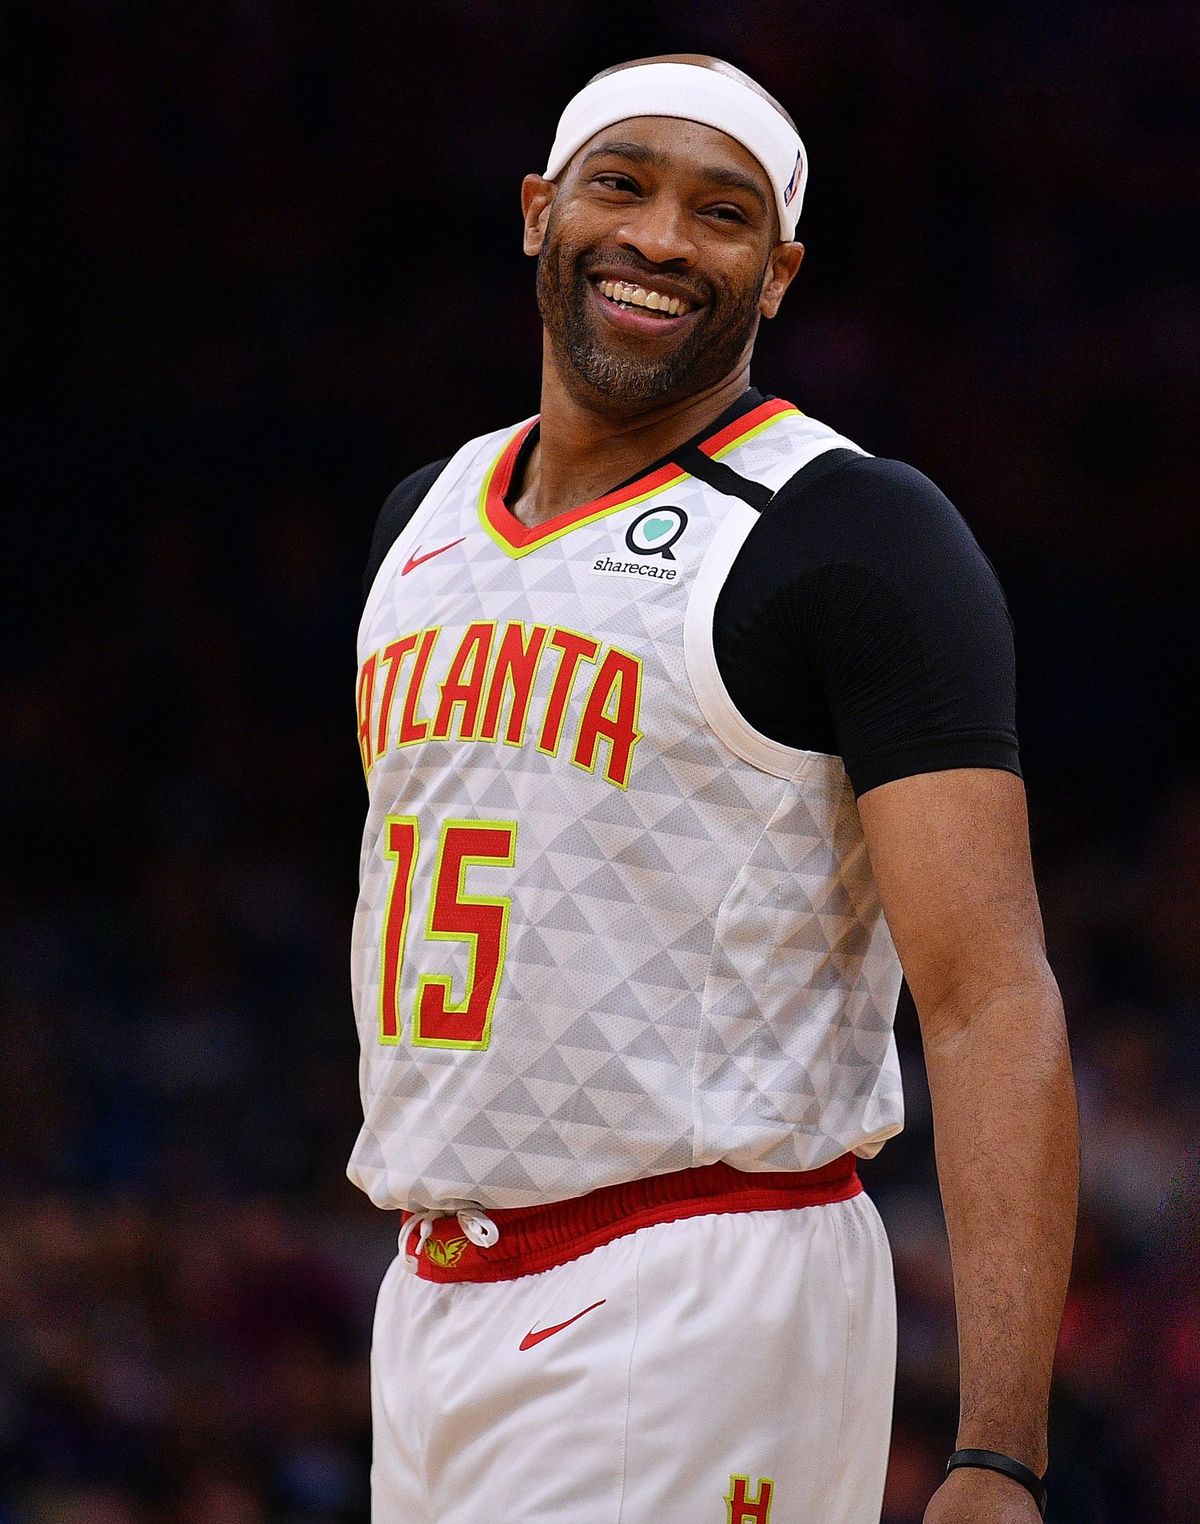 Vince Carter playing against Orlando Magic in February 2020 in Orlando, Florida | Source: Getty Images